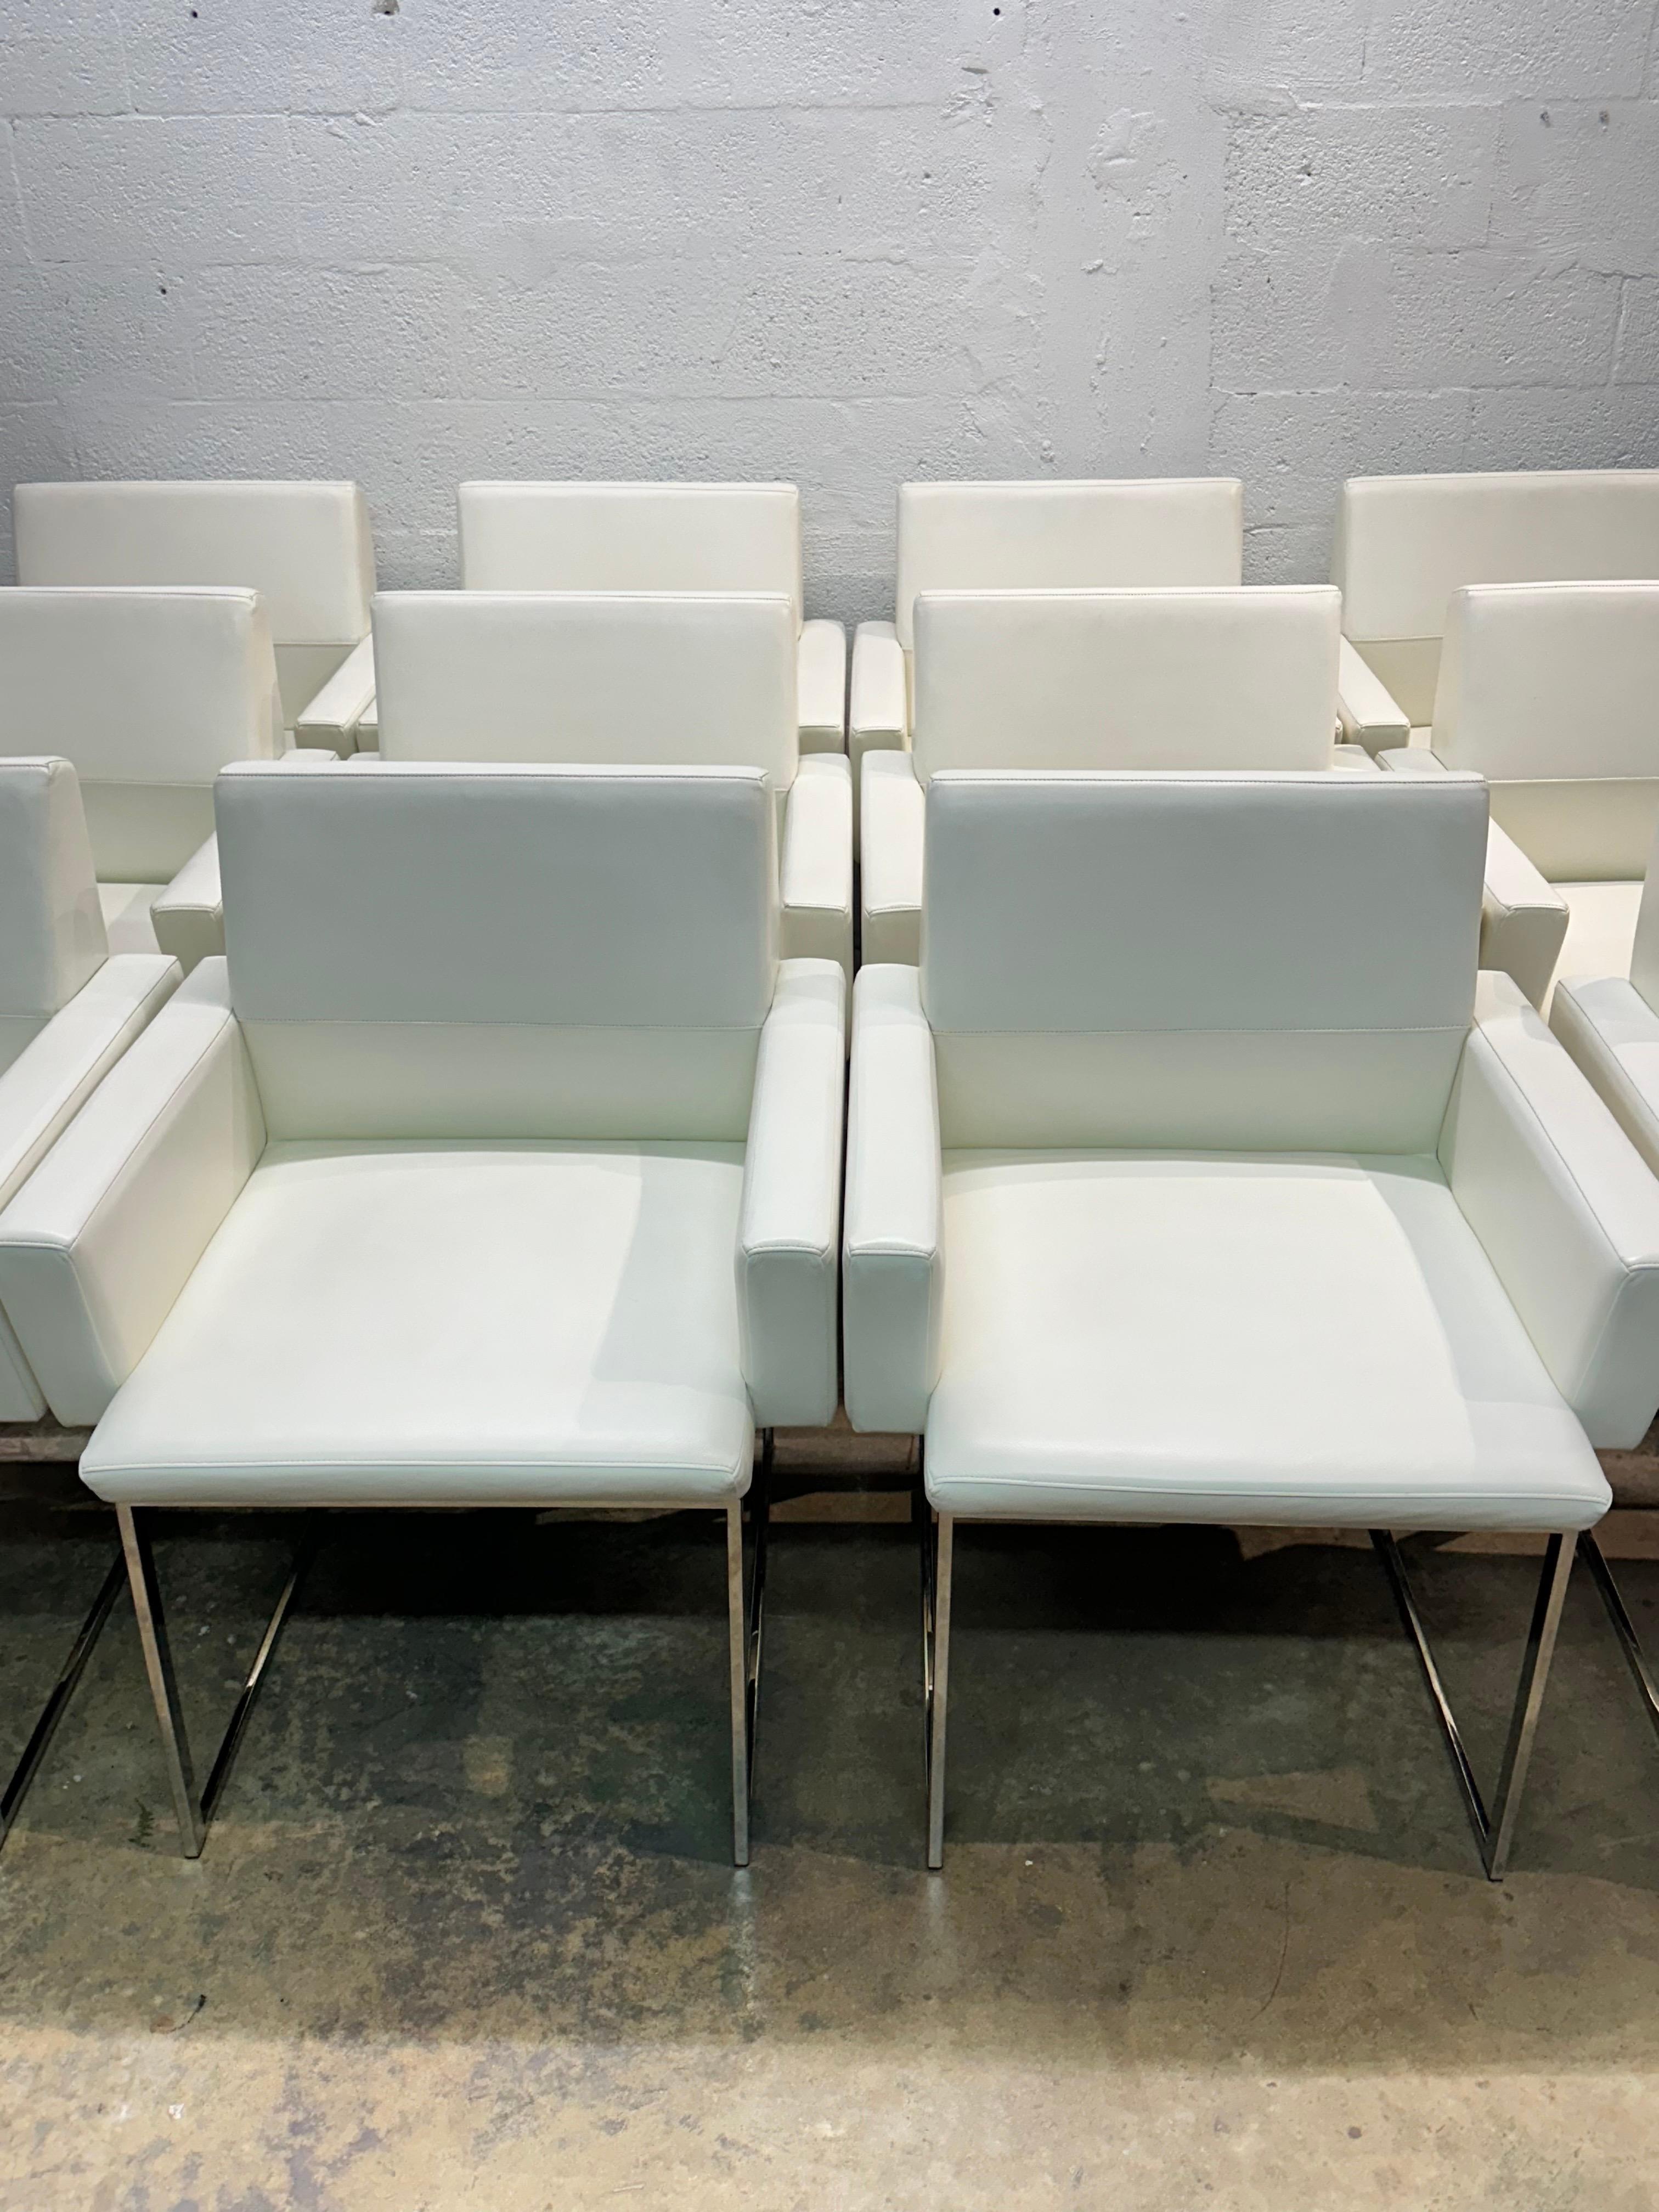 Bright white Naugahyde eco-leather dinging arm chairs on polished chrome bases by Brueton International.

Price is per pair of chairs.  Only five pairs available.  (One pair has sold)

Arm Height: 24-1/2”